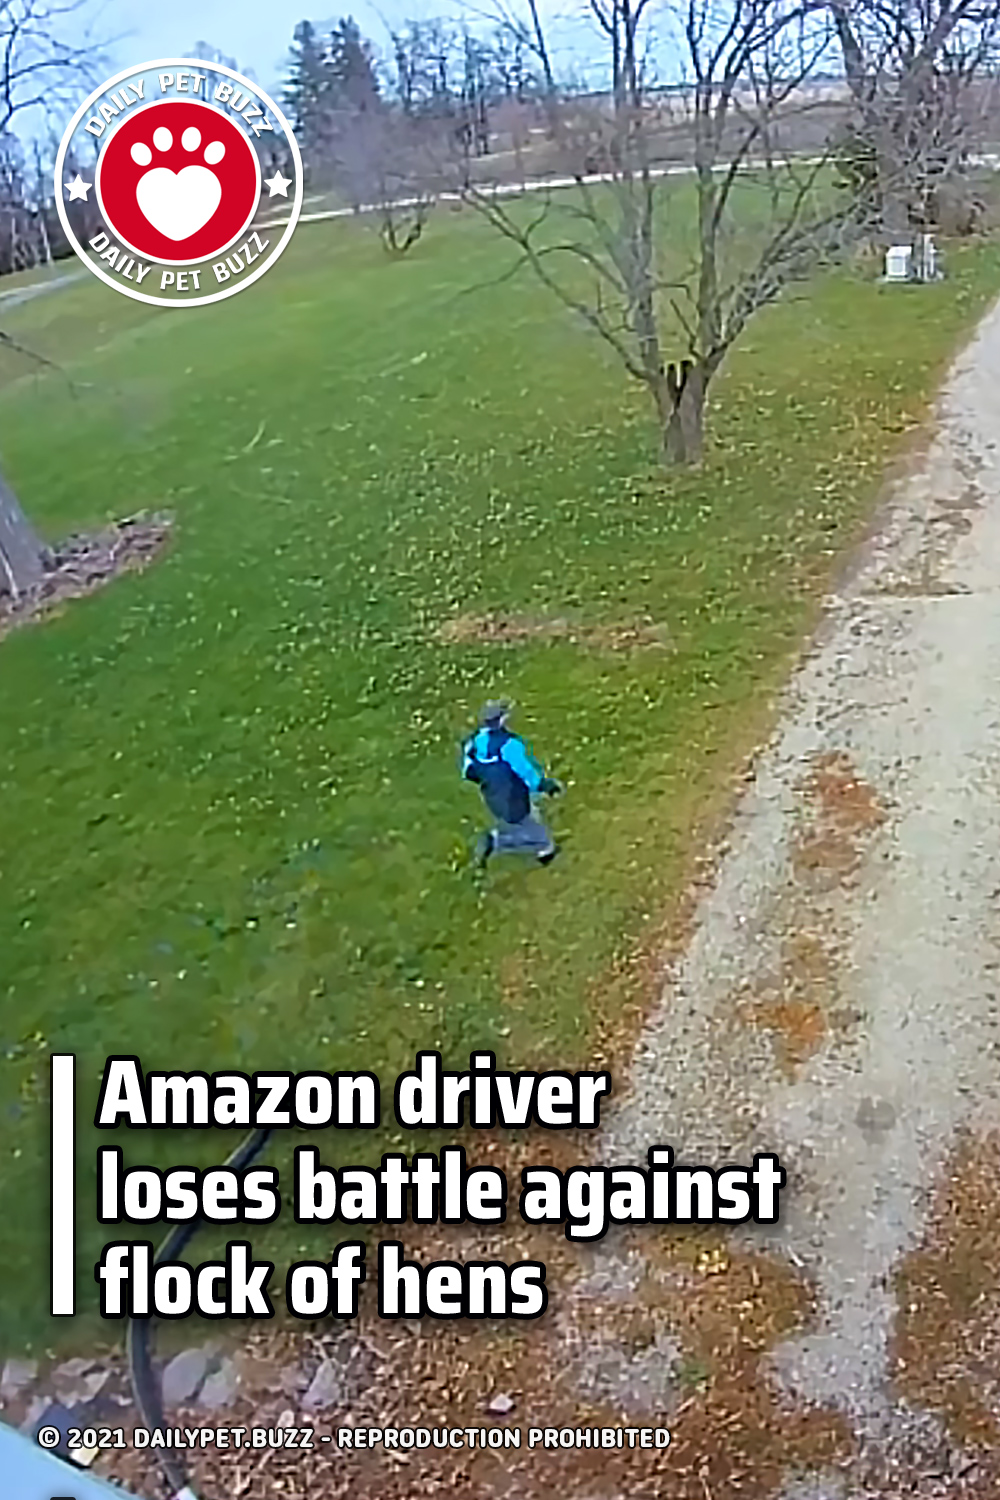 Amazon driver loses battle against flock of hens